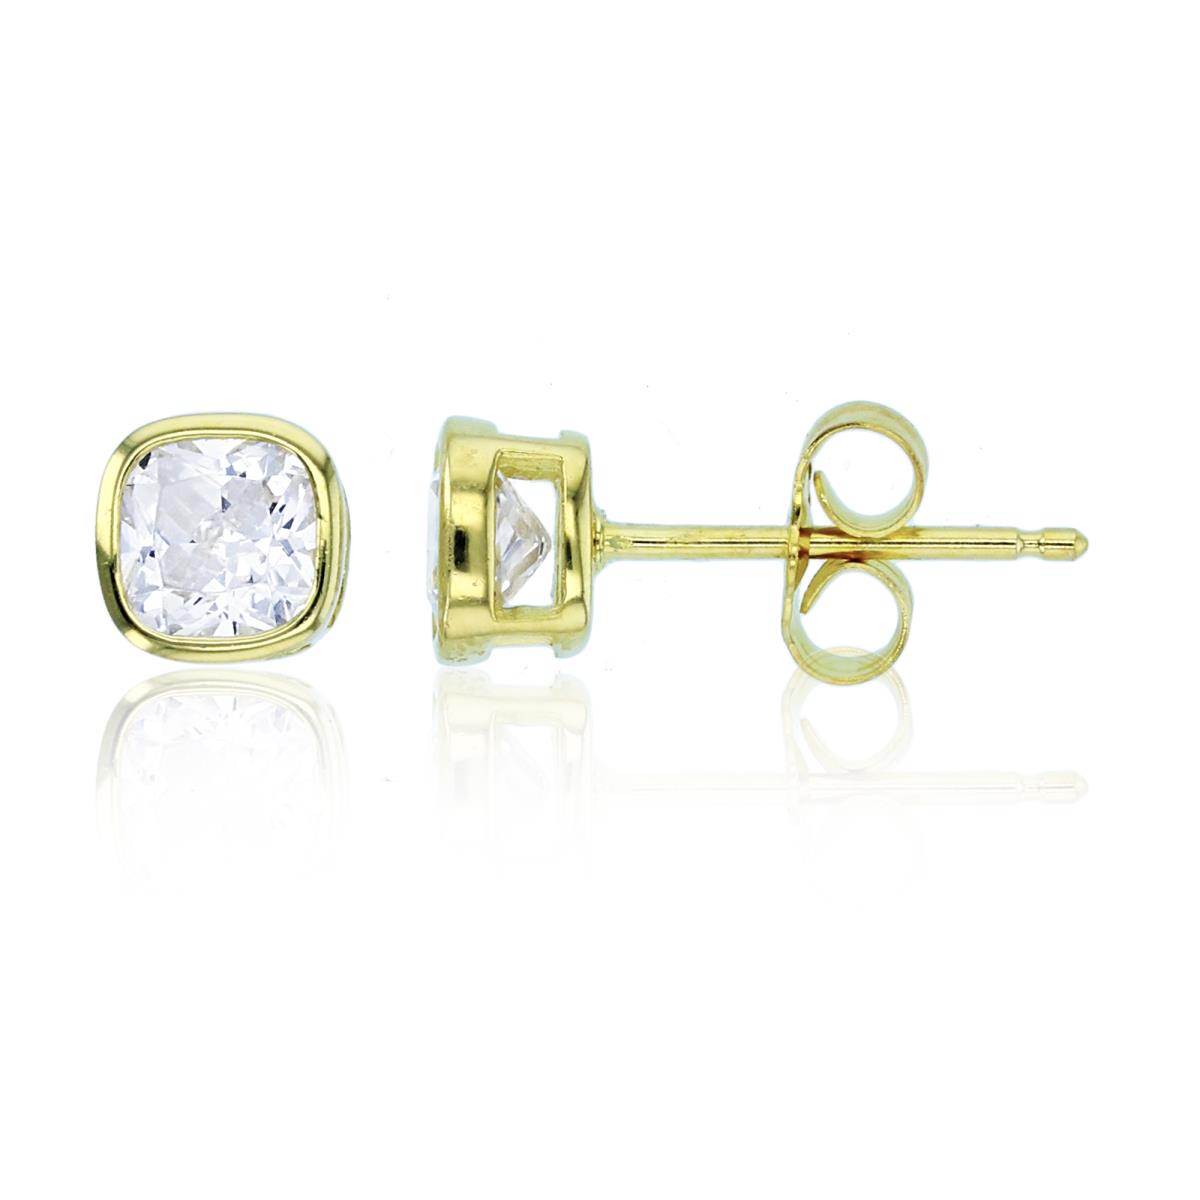 Sterling Silver+1Micron Yellow Gold 5mm Cushion CZ Bezel Studs